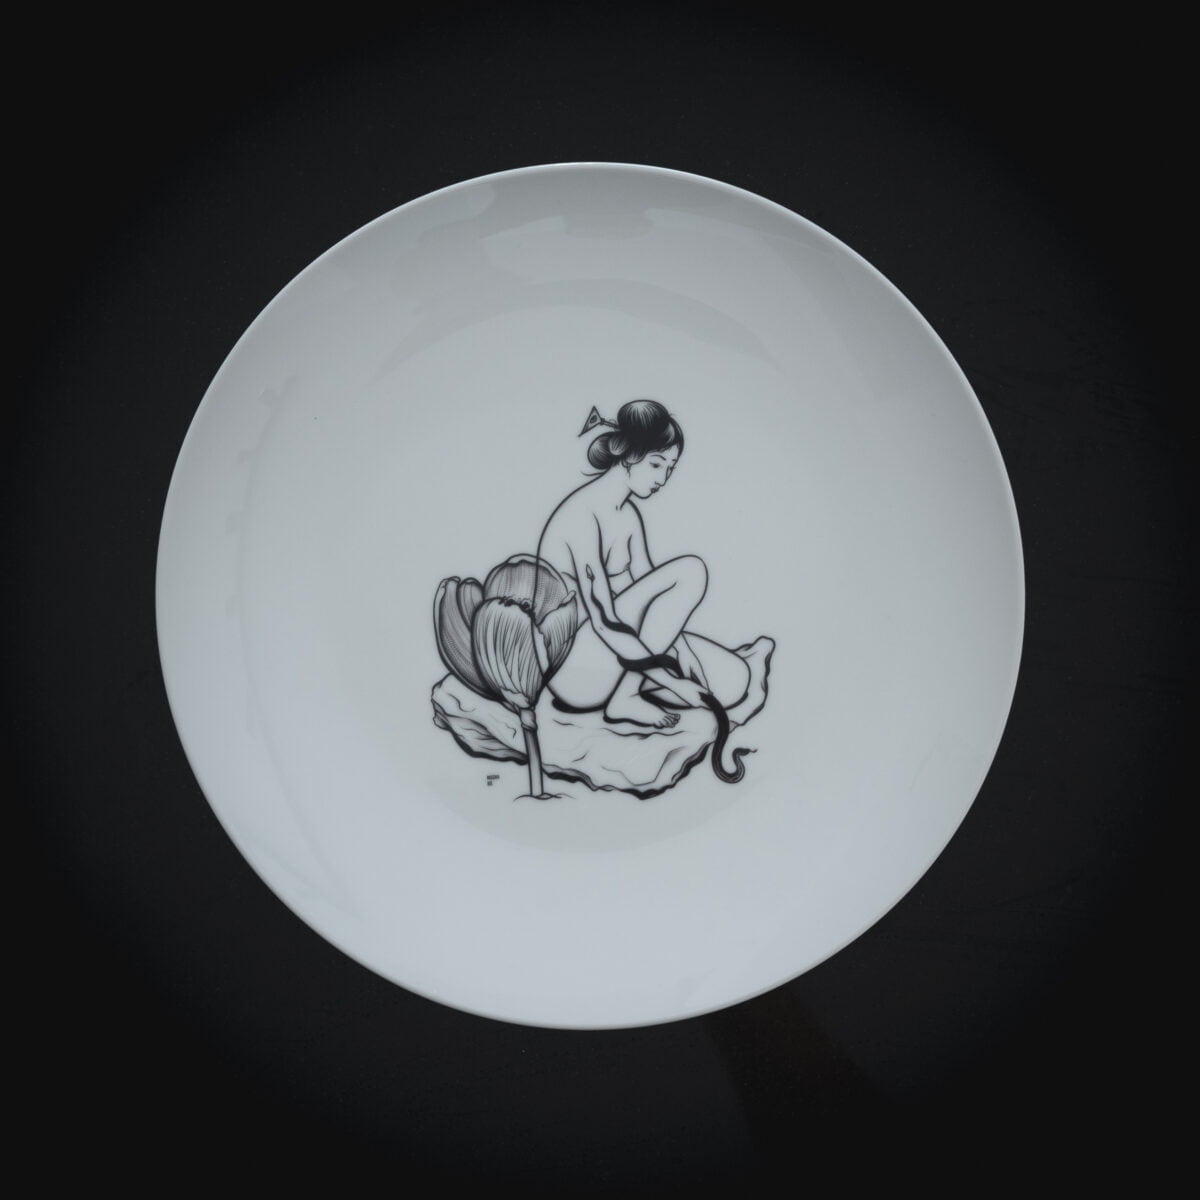 Original plate from contemporary artist - Masha Bo for sell. Plate with image of naked woman sitting on lotus plant leaf and braids her hair. View from forward.